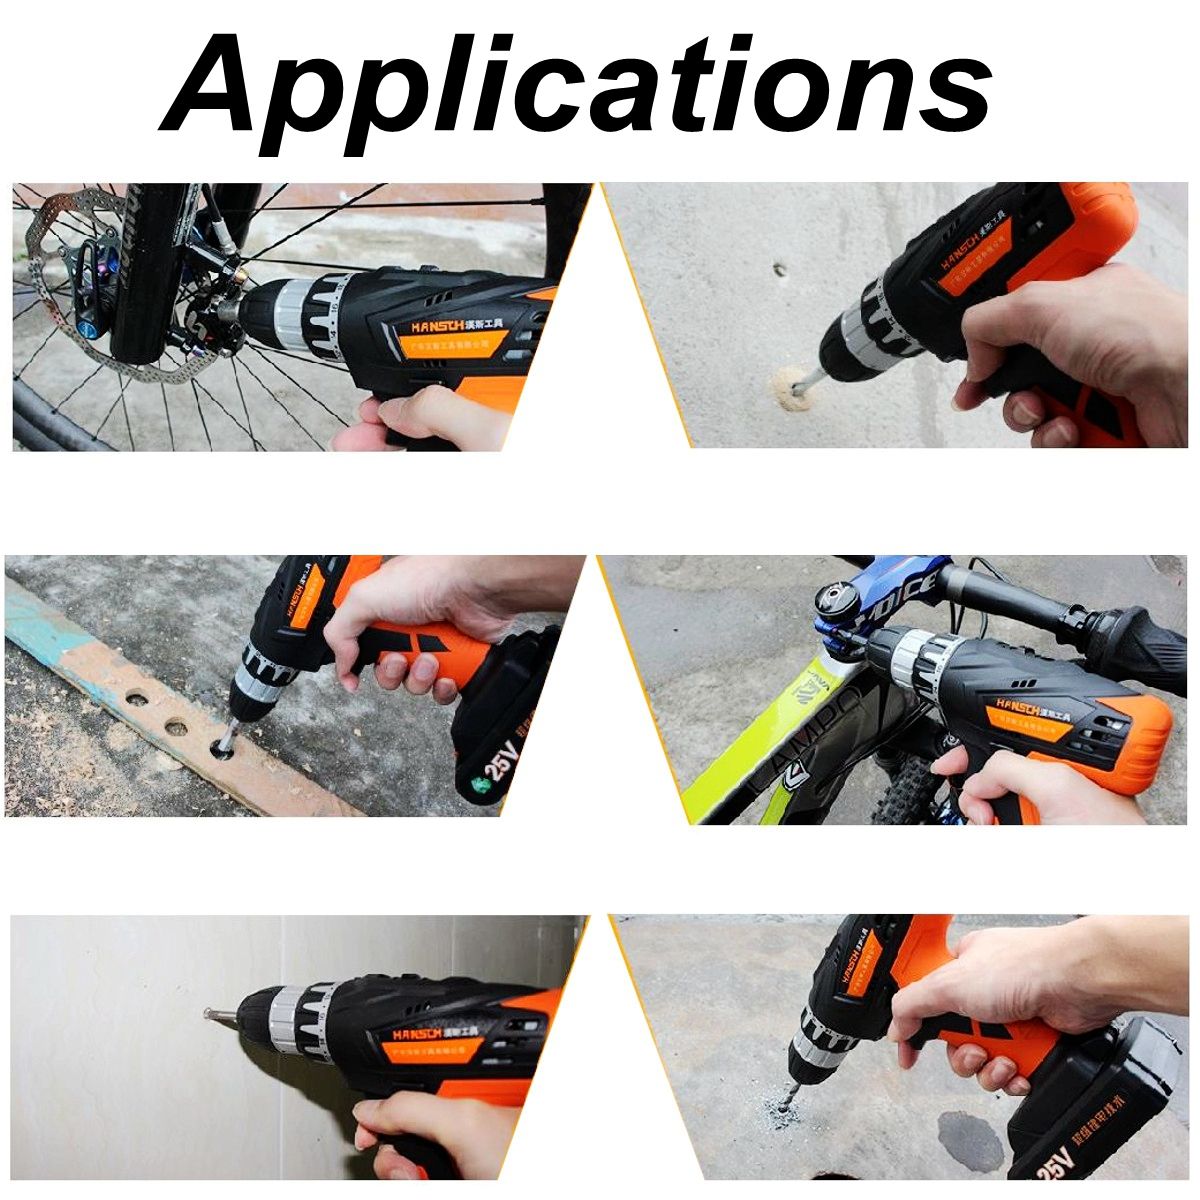 36V-Electric-Cordless-Drill-LED-Lighting-Double-Speed-Li-Ion-Battery-Power-Drills-Home-Repair-Tool-1412908